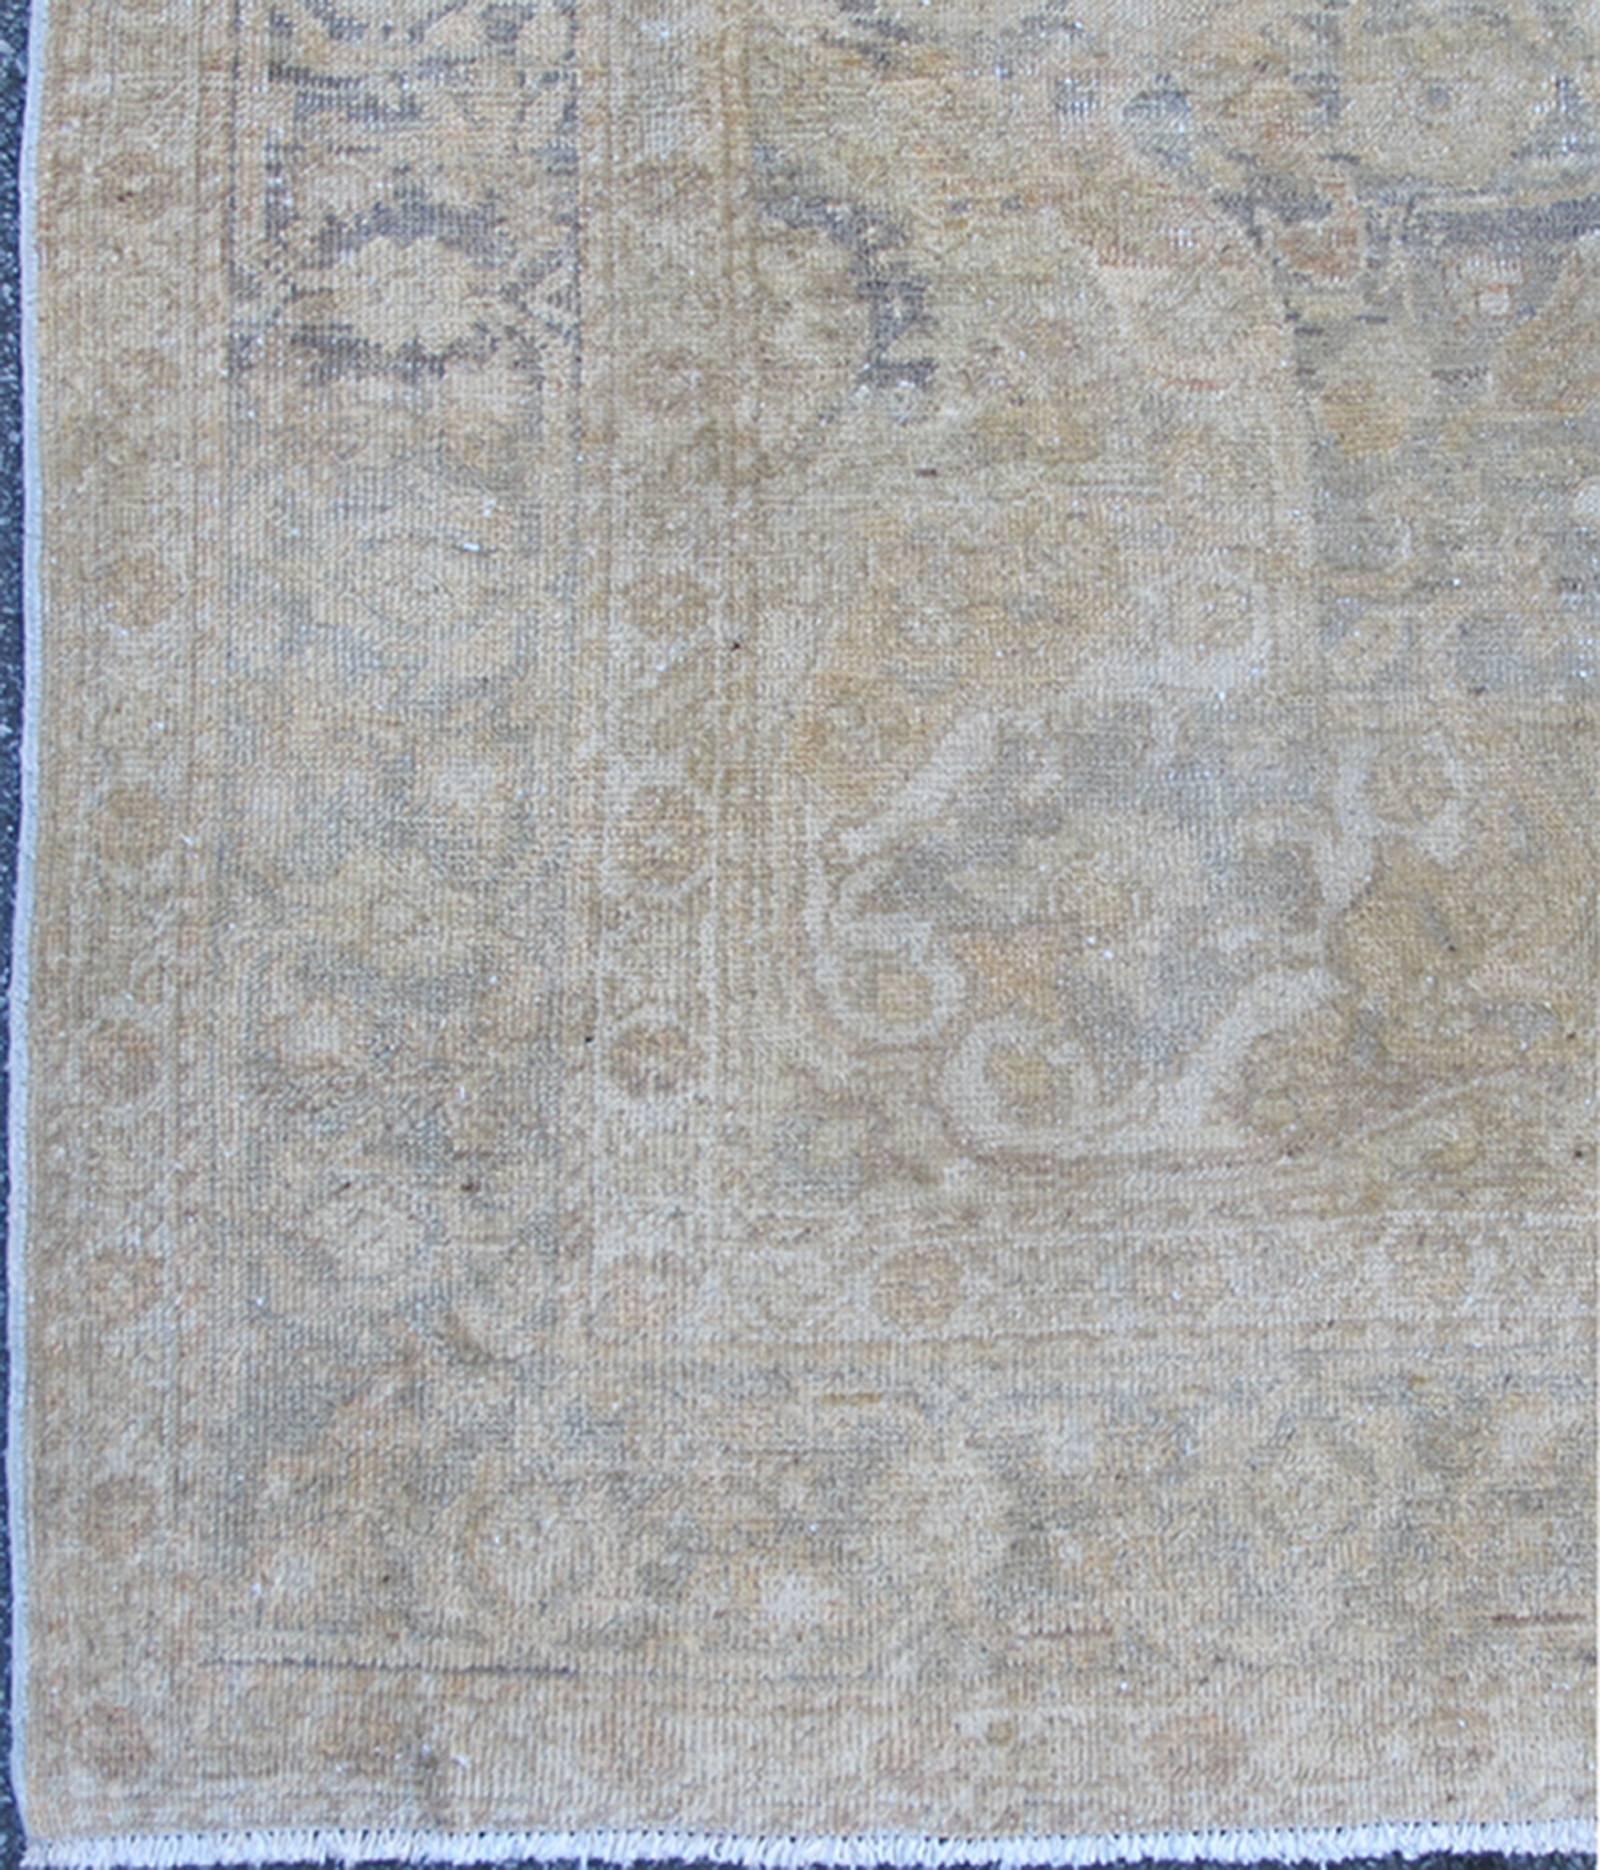 Gray faded vintage Turkish Sivas rug with floral motifs and medallion, rug en-777, country of origin / type: Turkey / Oushak, circa mid-20th century.

Fine Sivas rugs from western Anatolia are renowned for their fine weaves and intricate designs.